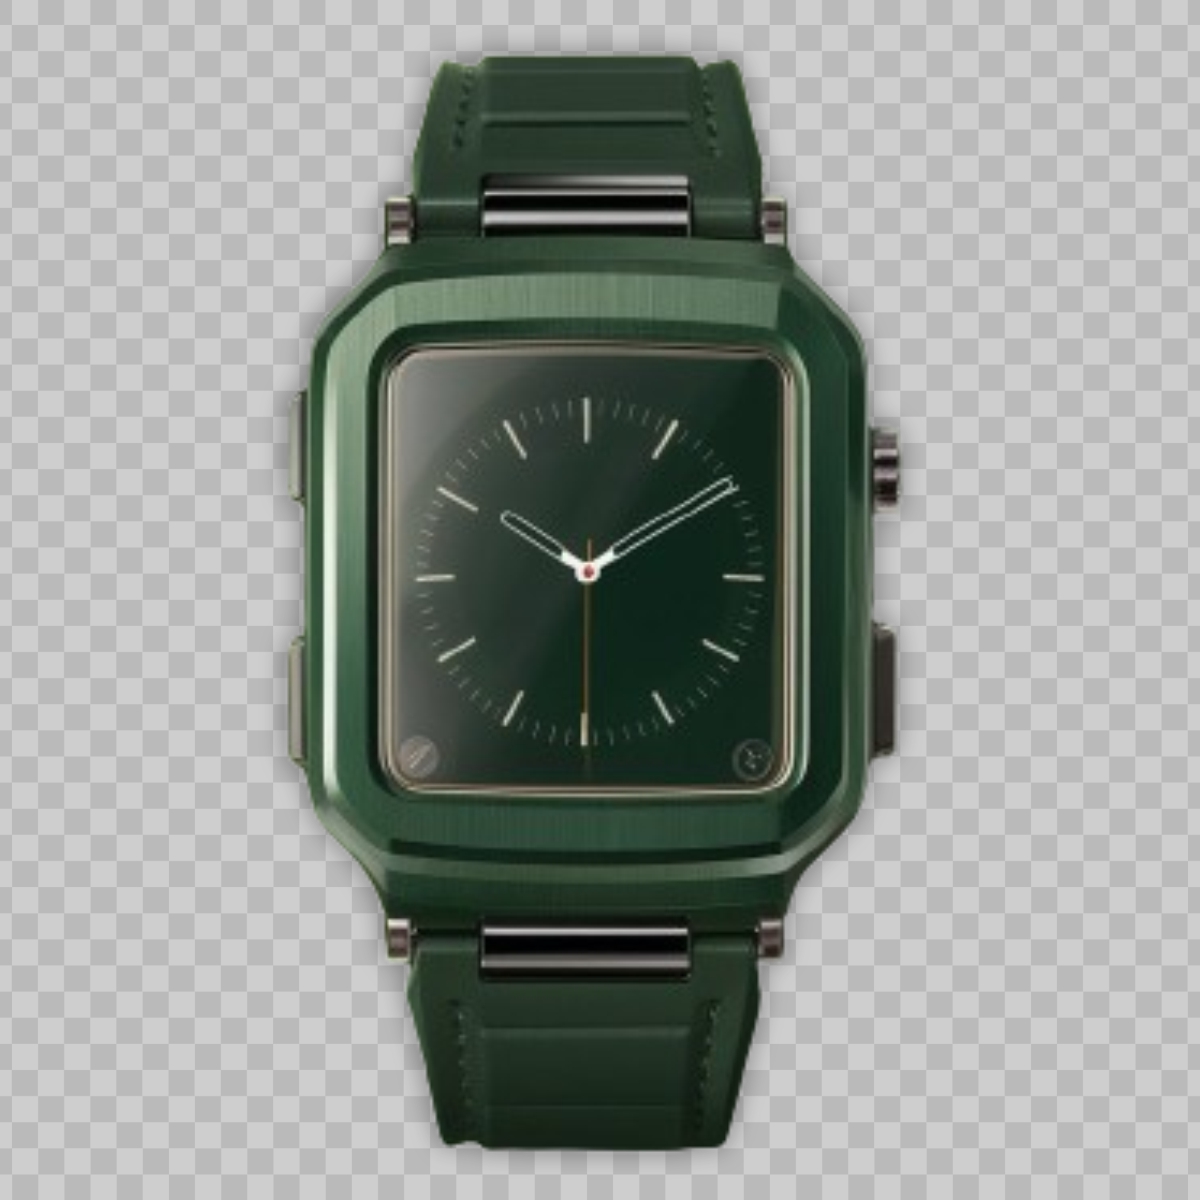 Dark Green color  watch PNG image download for free